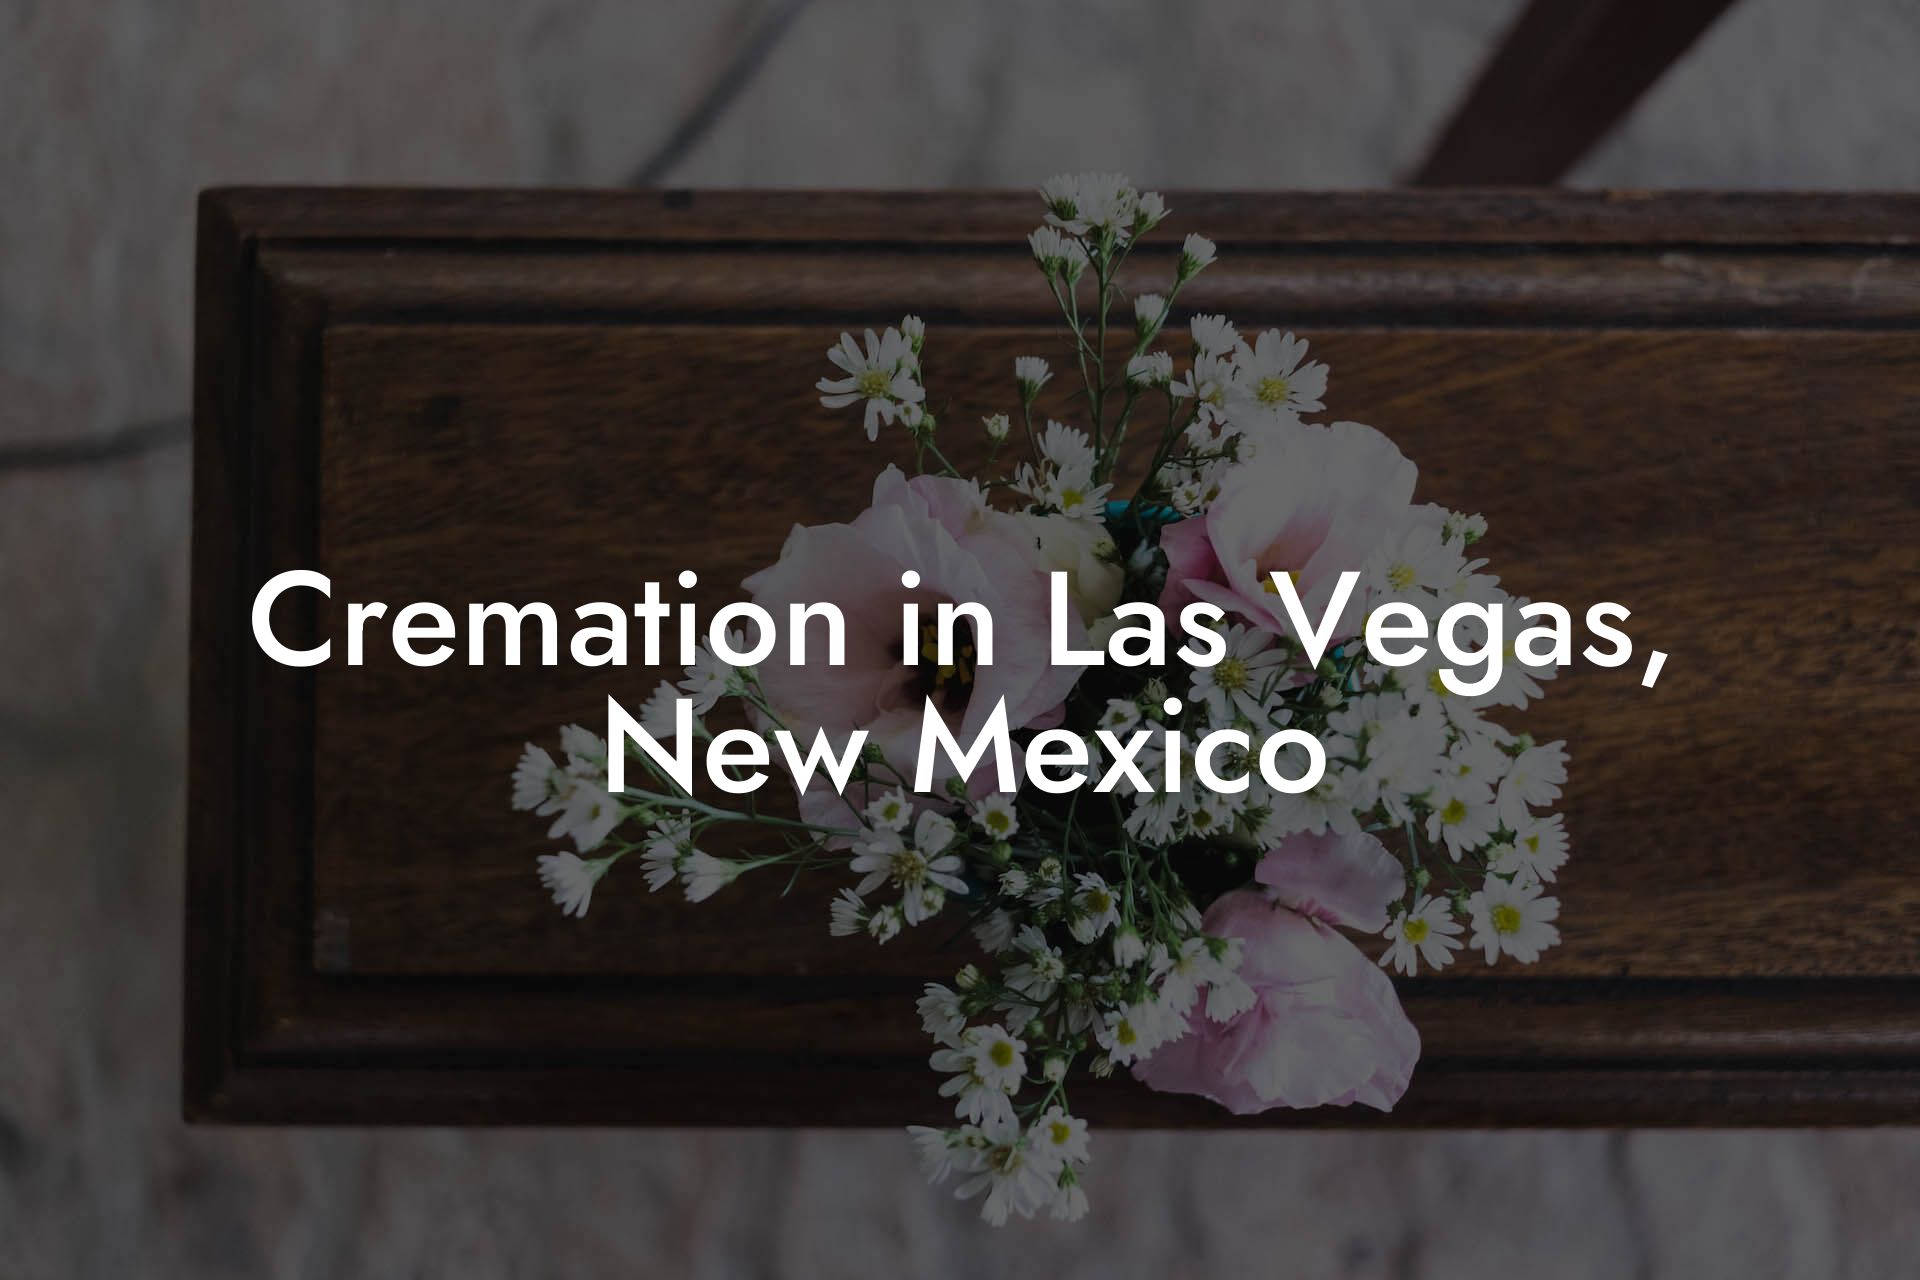 Cremation in Las Vegas, New Mexico